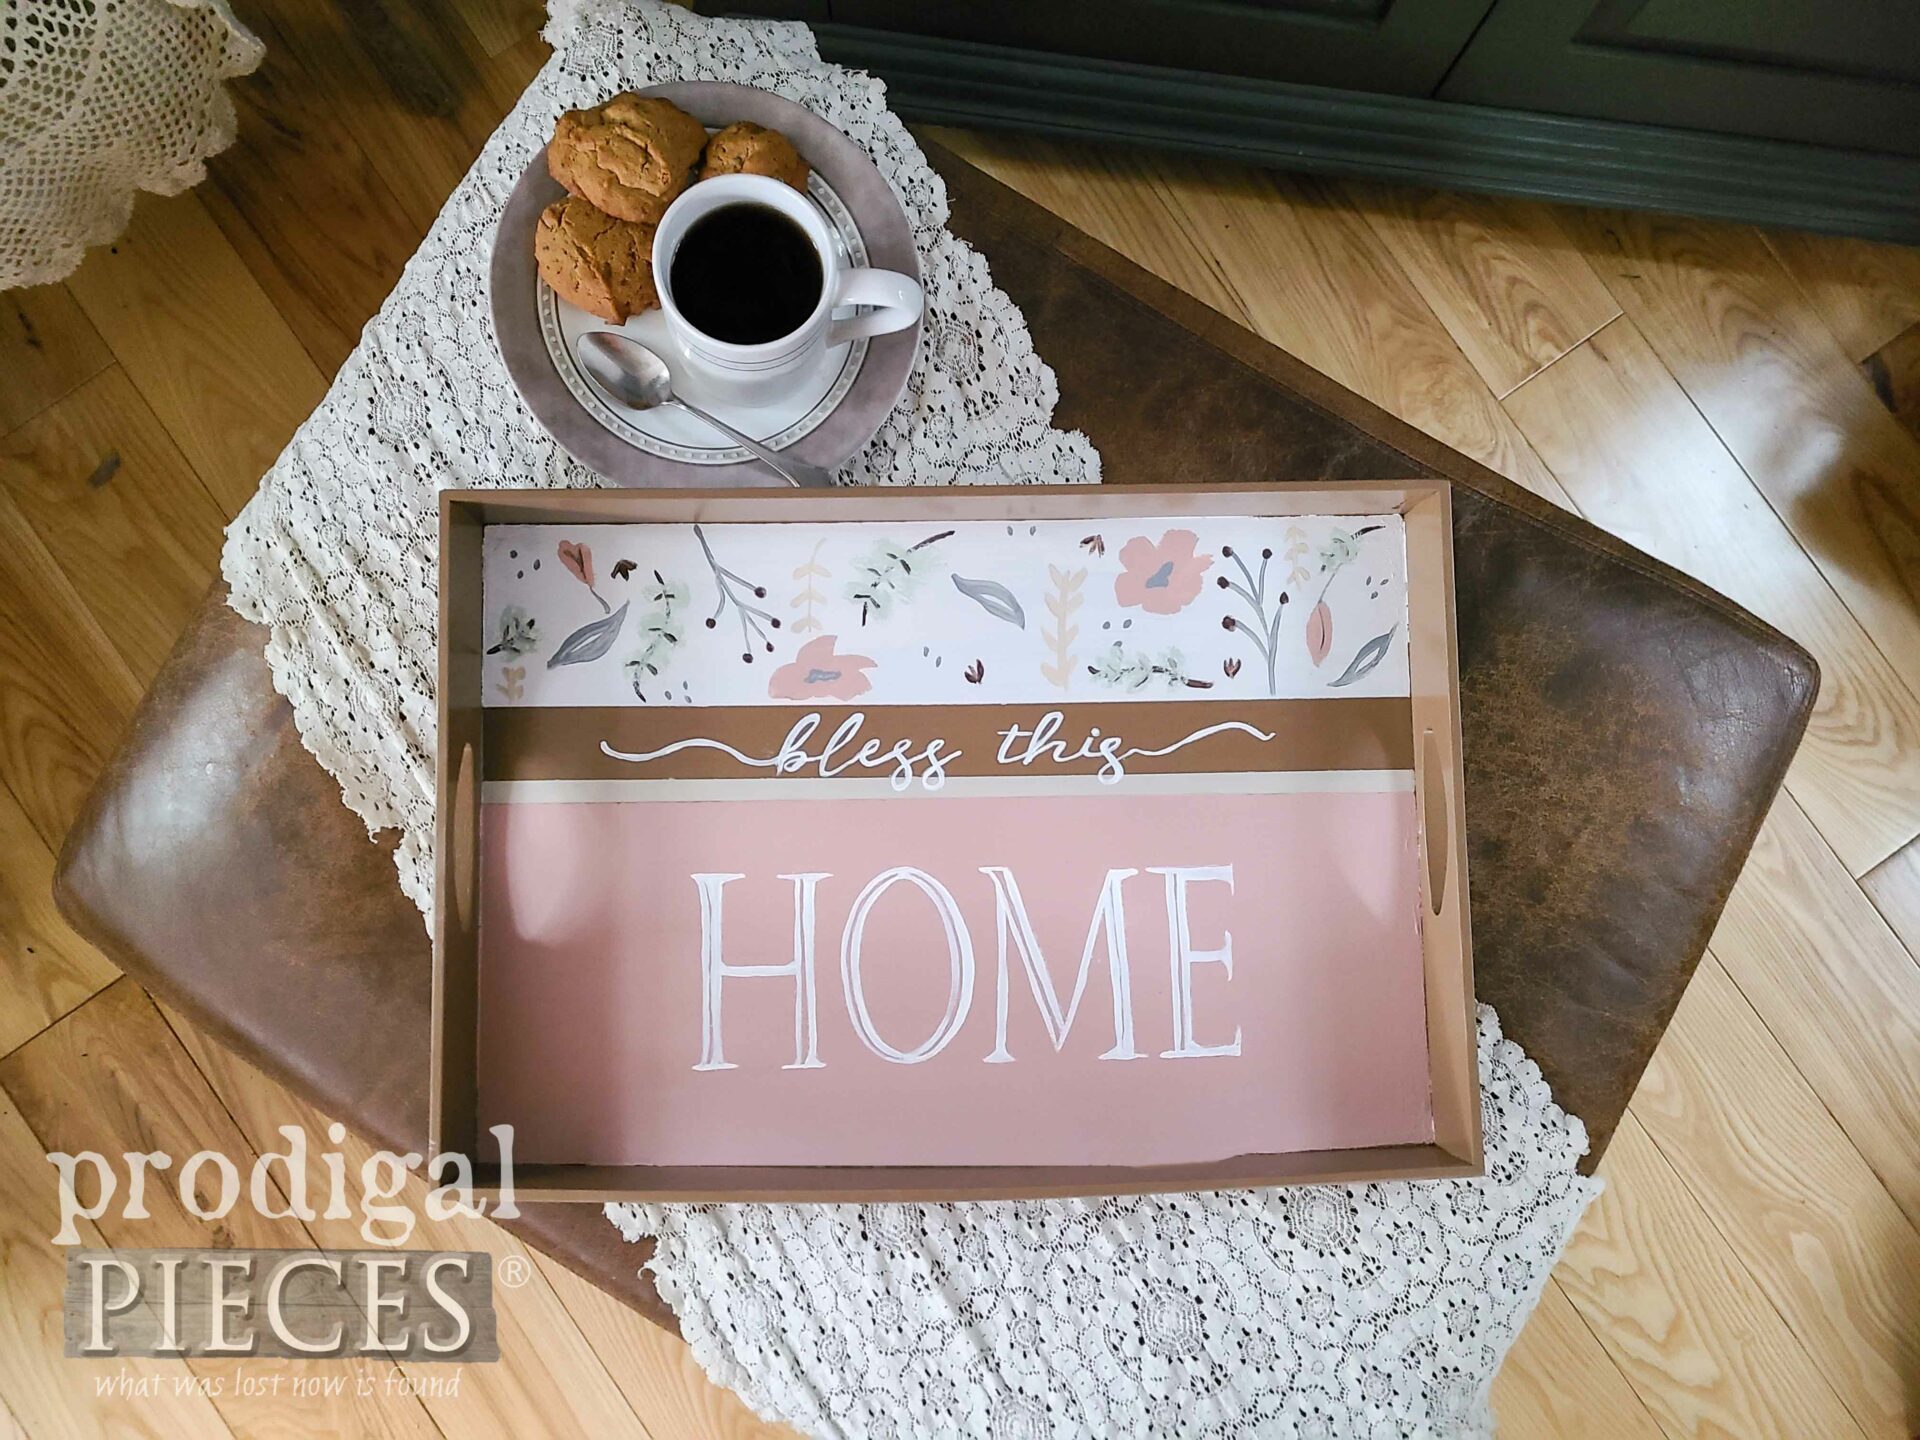 DIY Thrift Store Tray Makeover by Larissa of Prodigal Pieces | prodigalpieces.com #prodigalpieces #diy #thrifted #homedecor 